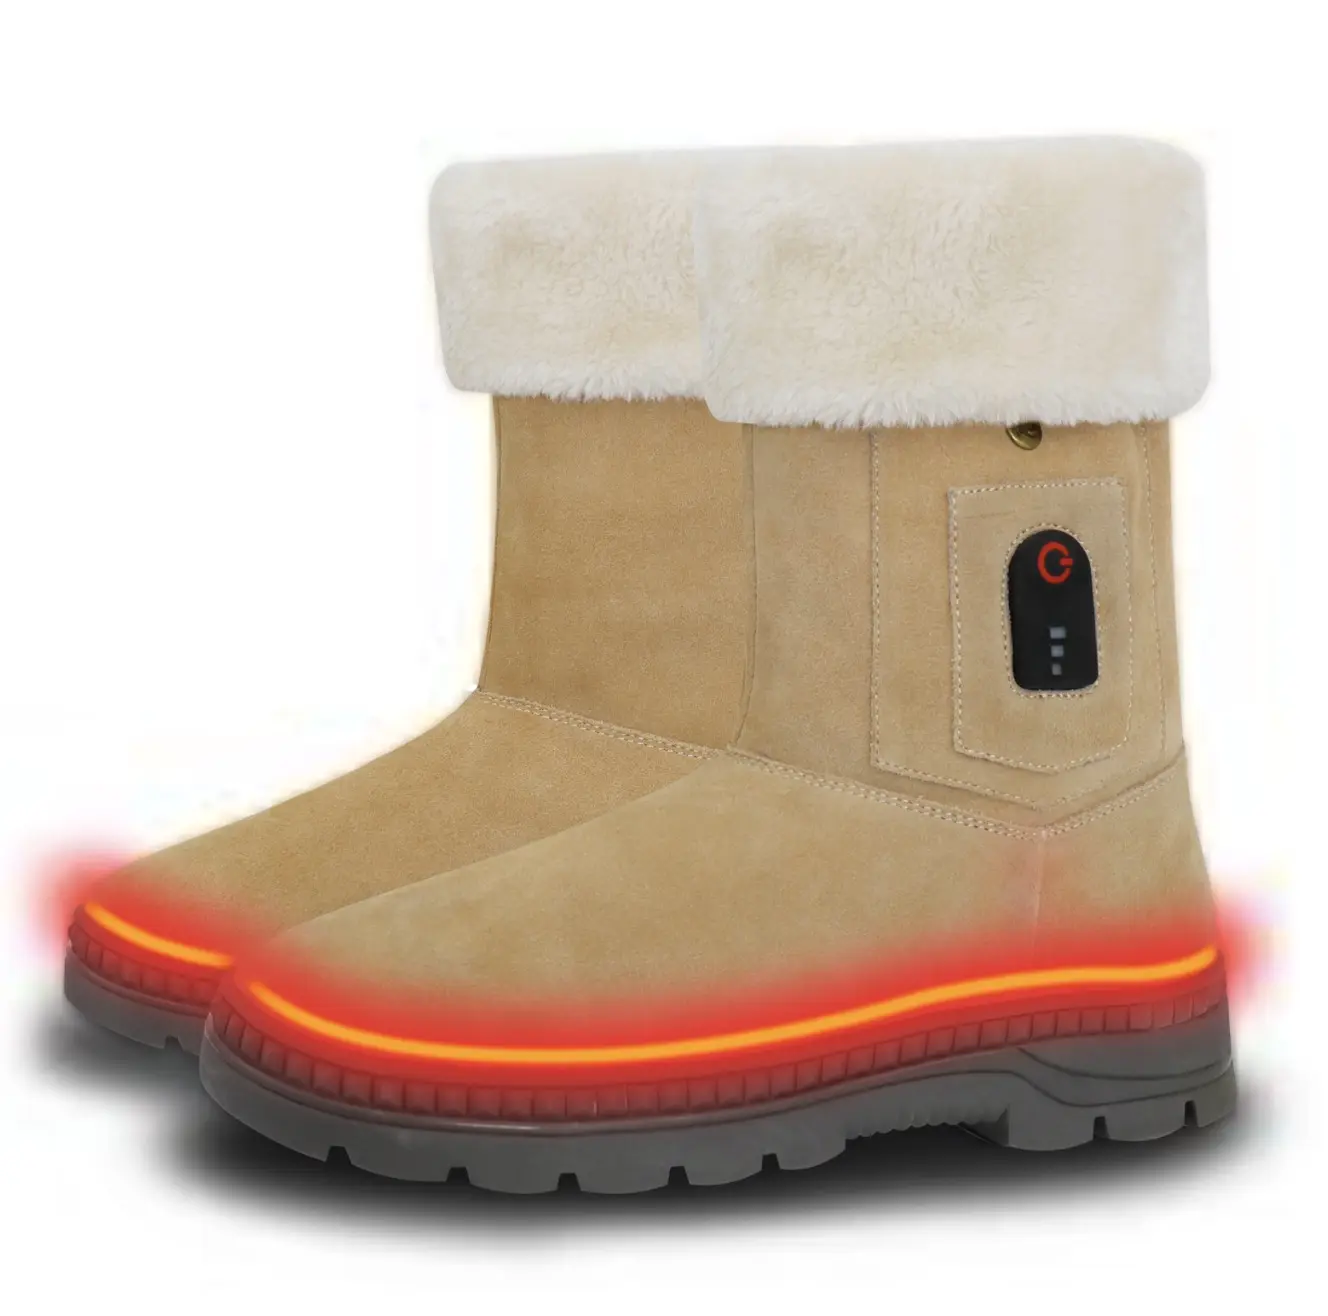 7.4V Cow Suede Split Leather heated boots,Rechargeable Battery Powered Heated Boots